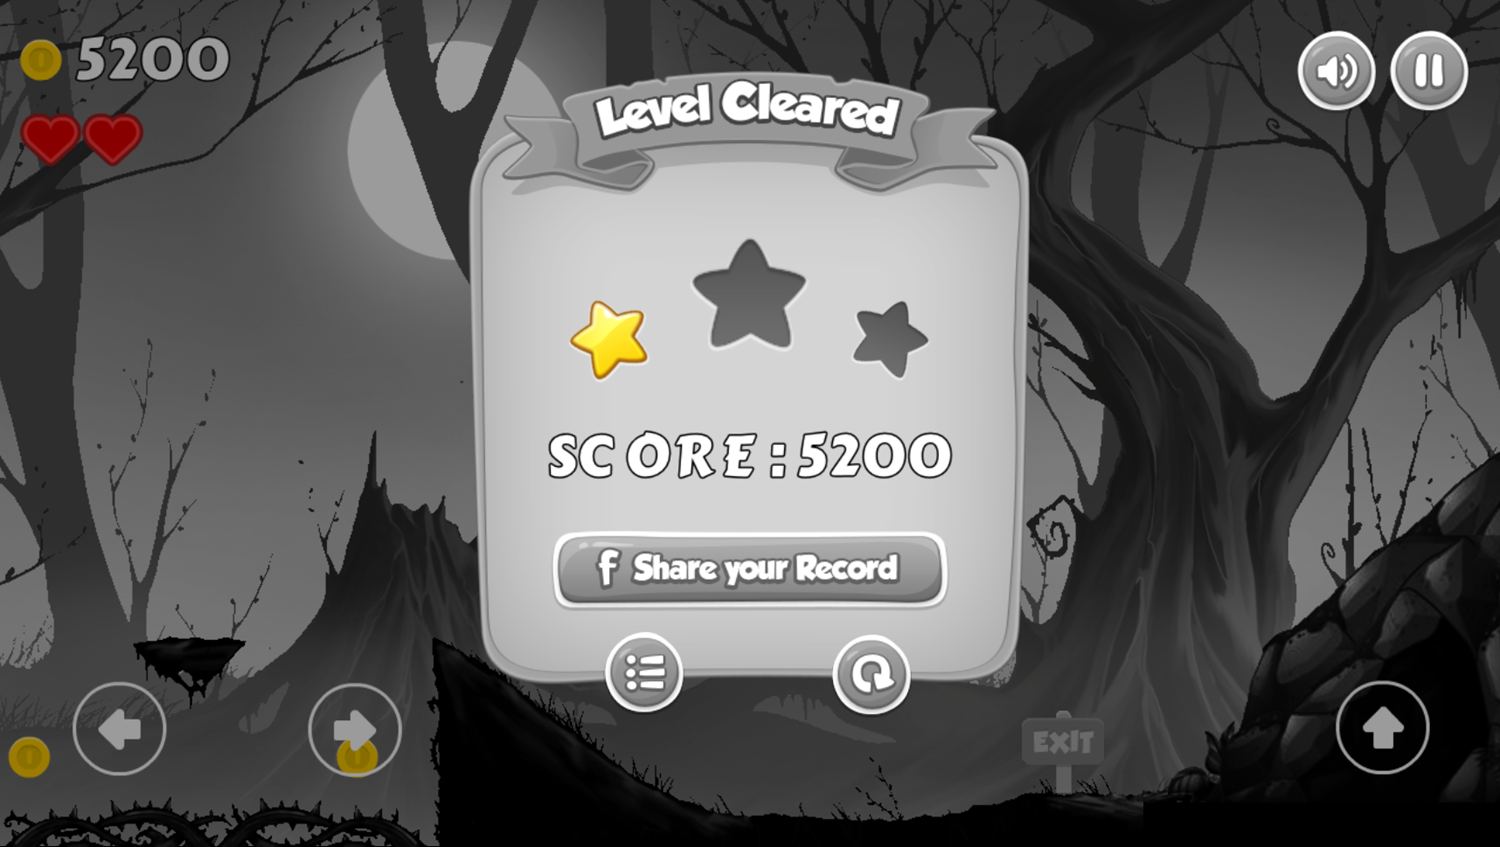 Shadow Boy Adventures Game Level Cleared Screenshot.